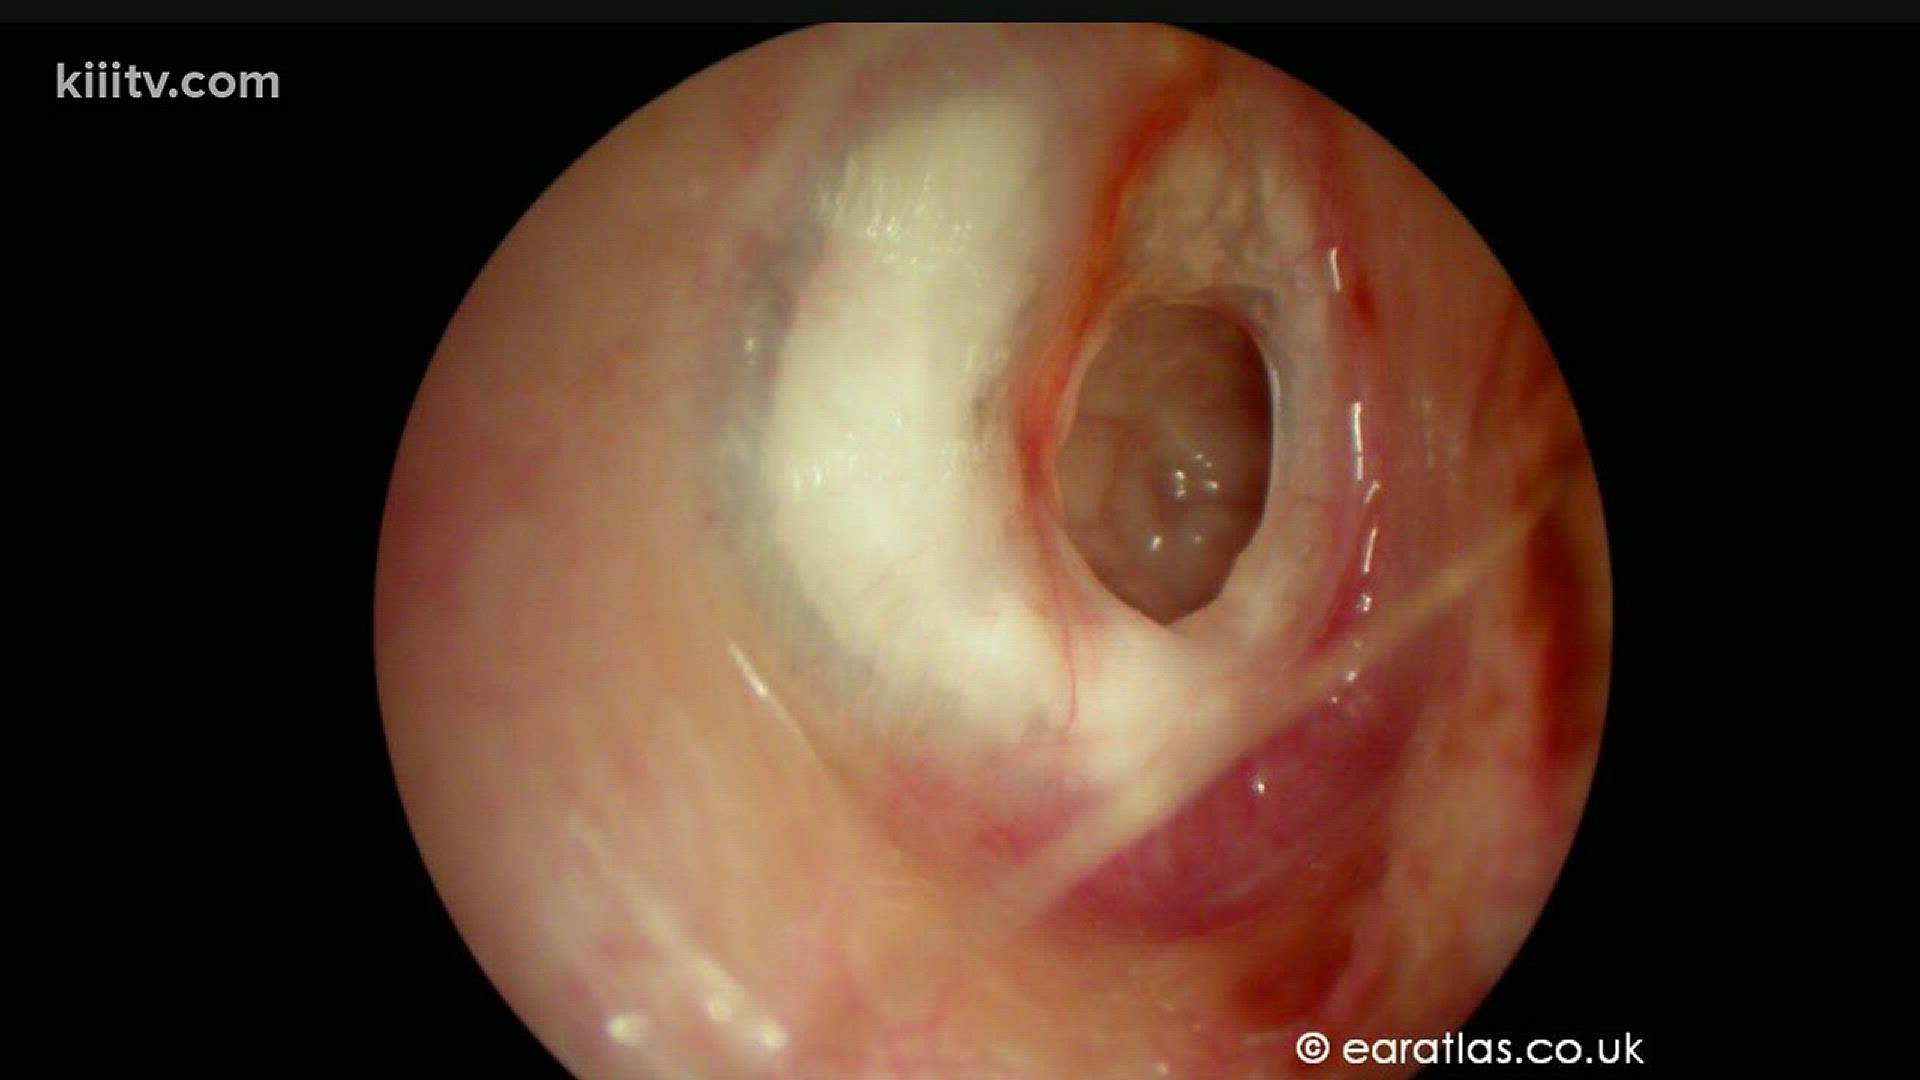 On Dr. Is In, we discuss what an ruptured eardrum is, how it can happen and what to do if you have one.